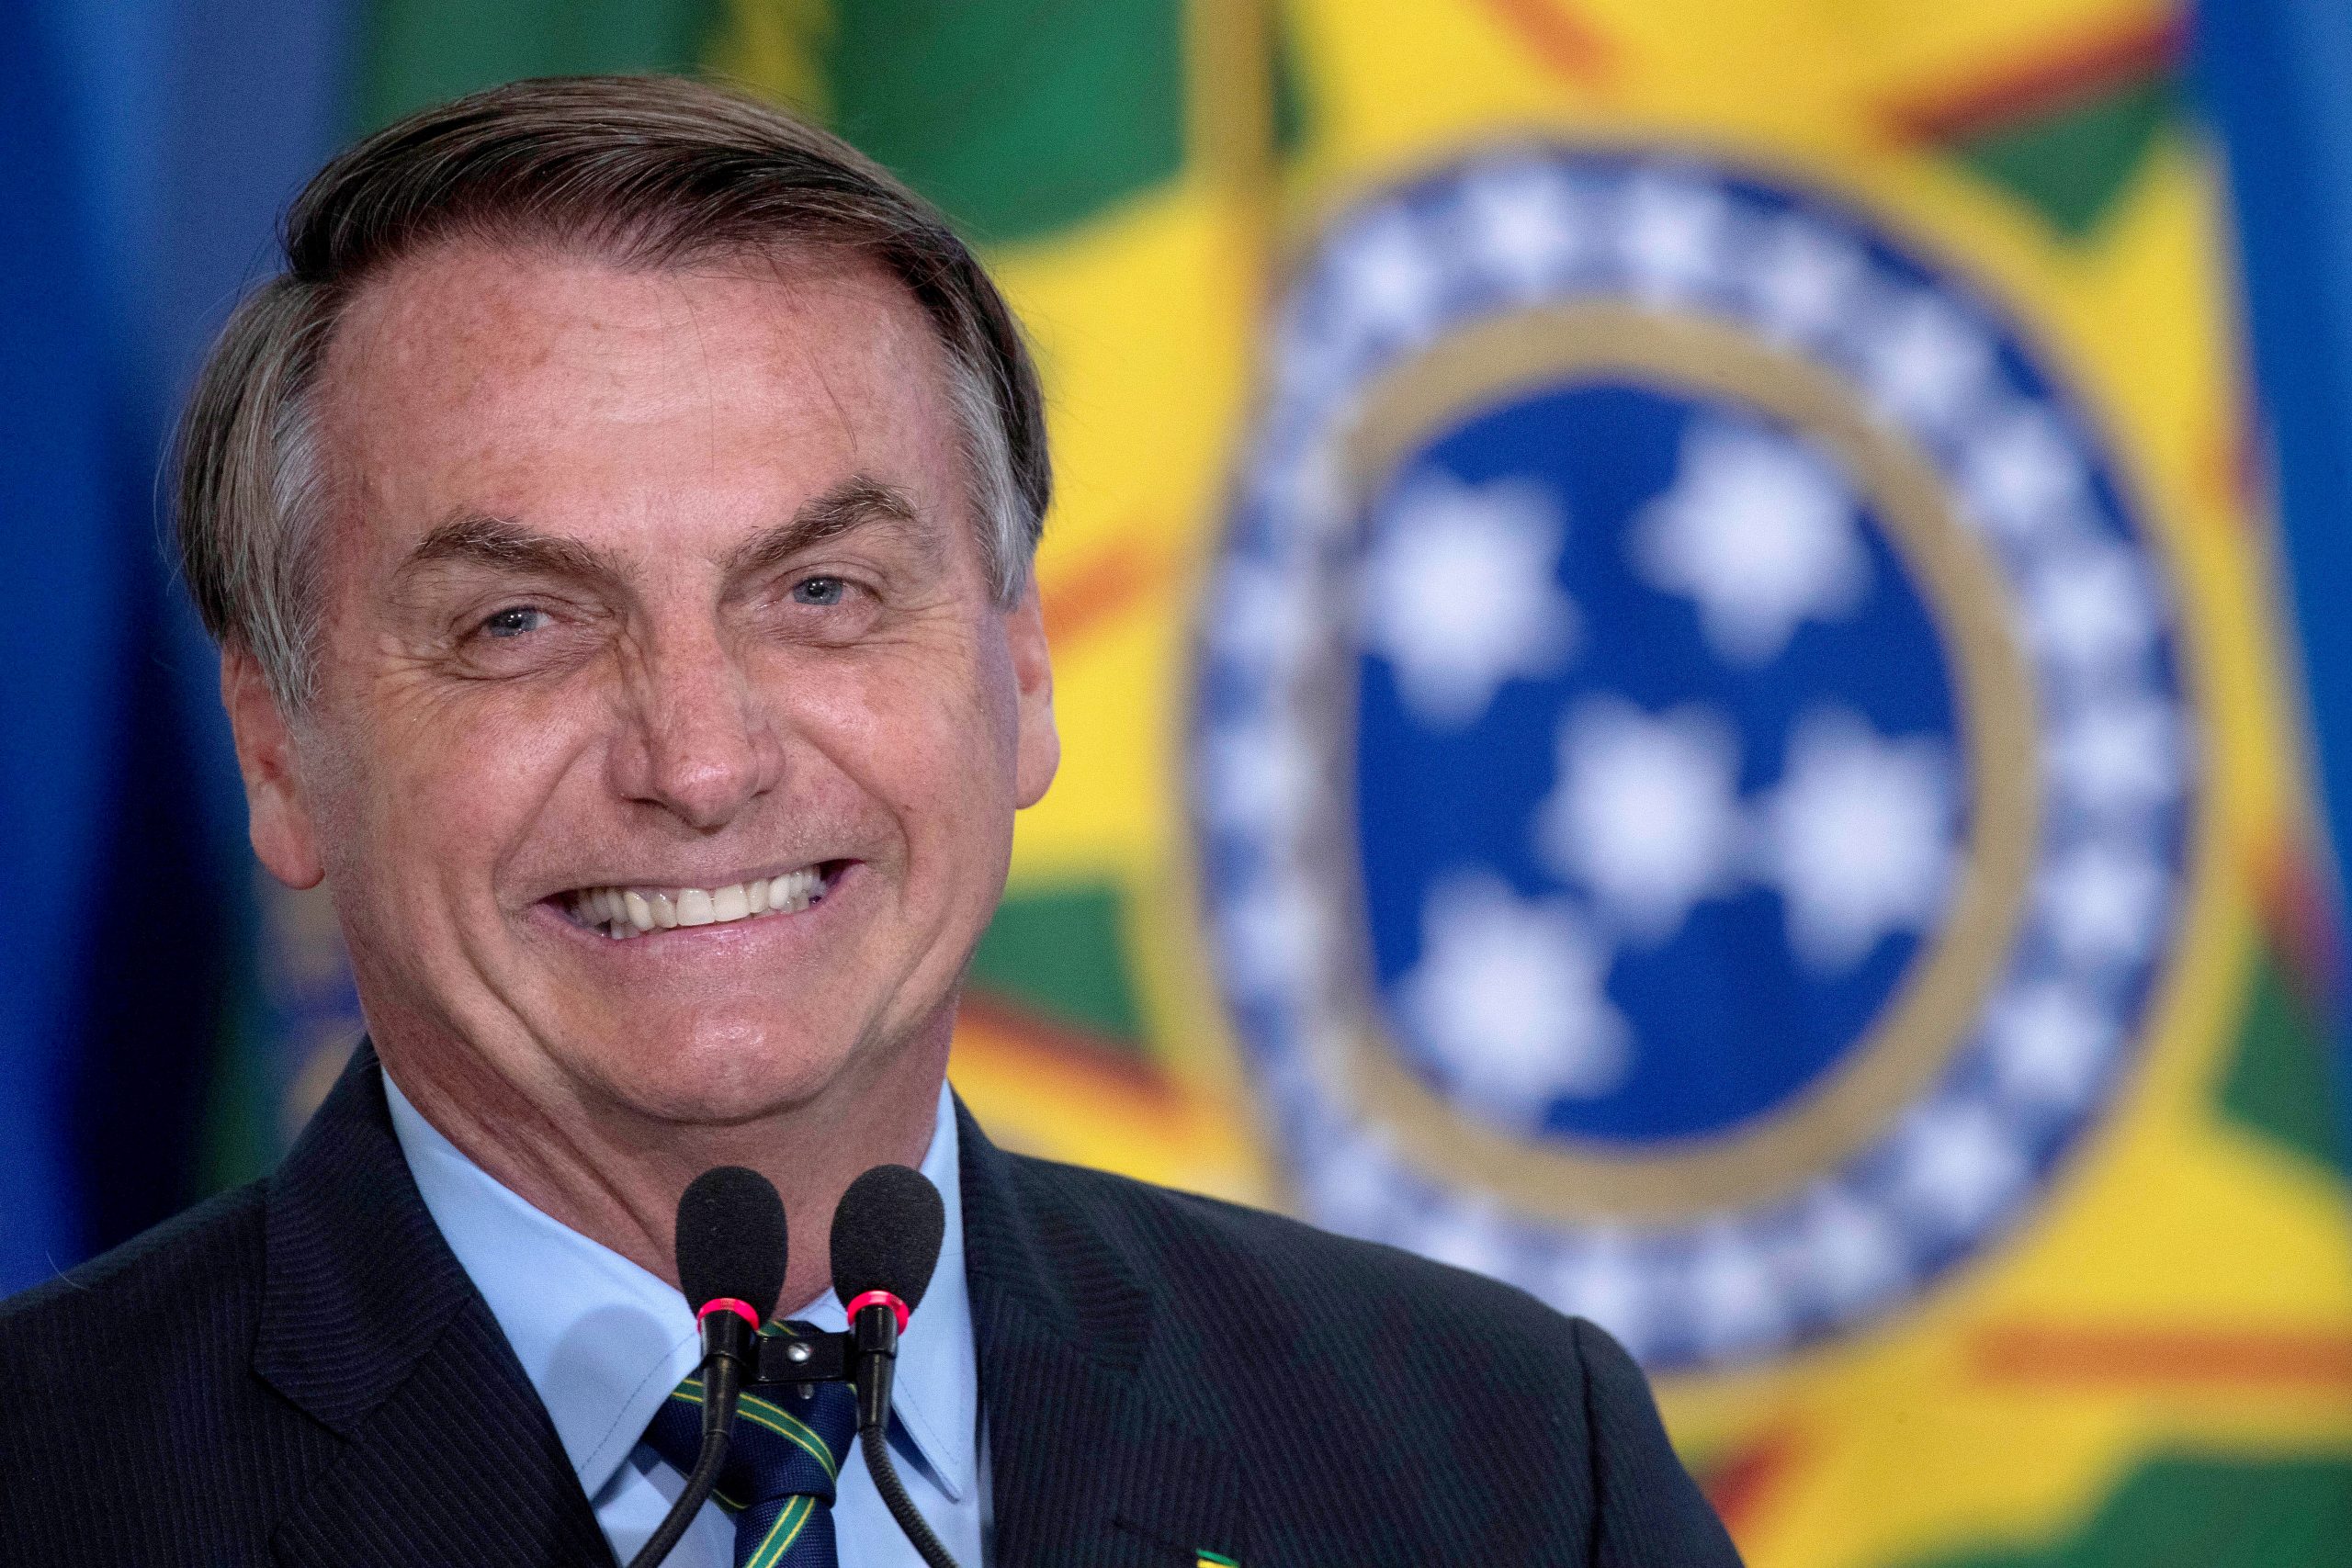 epa08532717 (FILE) - The President of Brazil Jair Bolsonaro reacts during Actress Regina Duarte, known for her roles in famous soap operas, ceremony to assume the Ministry of Culture, in Brasilia, Brazil, 04 march 2020 (reissued 07 July 2020). Bolsonaro, 65, reported on 07 July that he has tested positive for COVID-19 and has begun to be treated with chloroquine.  EPA/Joedson Alves *** Local Caption *** 55927587